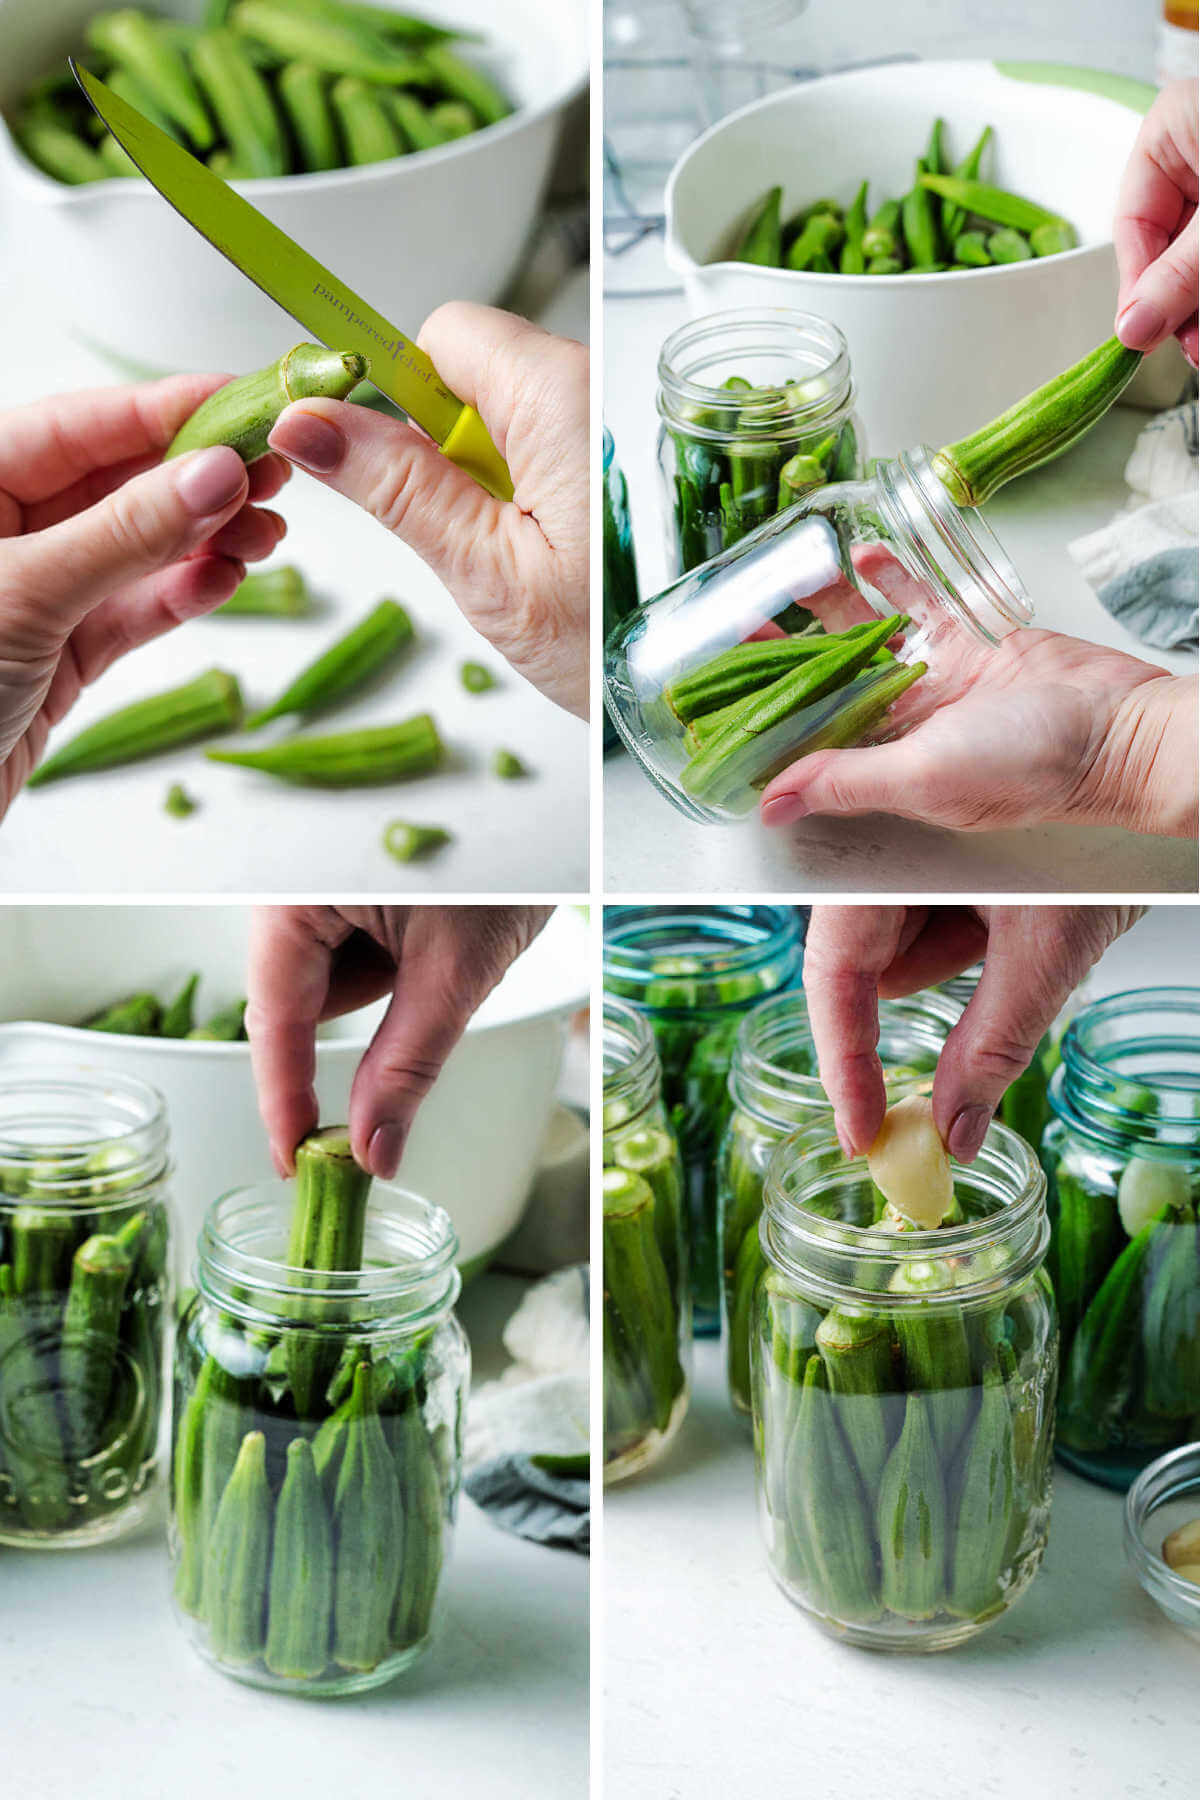 slicing the stems off okra pods; packing sterilized jars with whole okra pods.